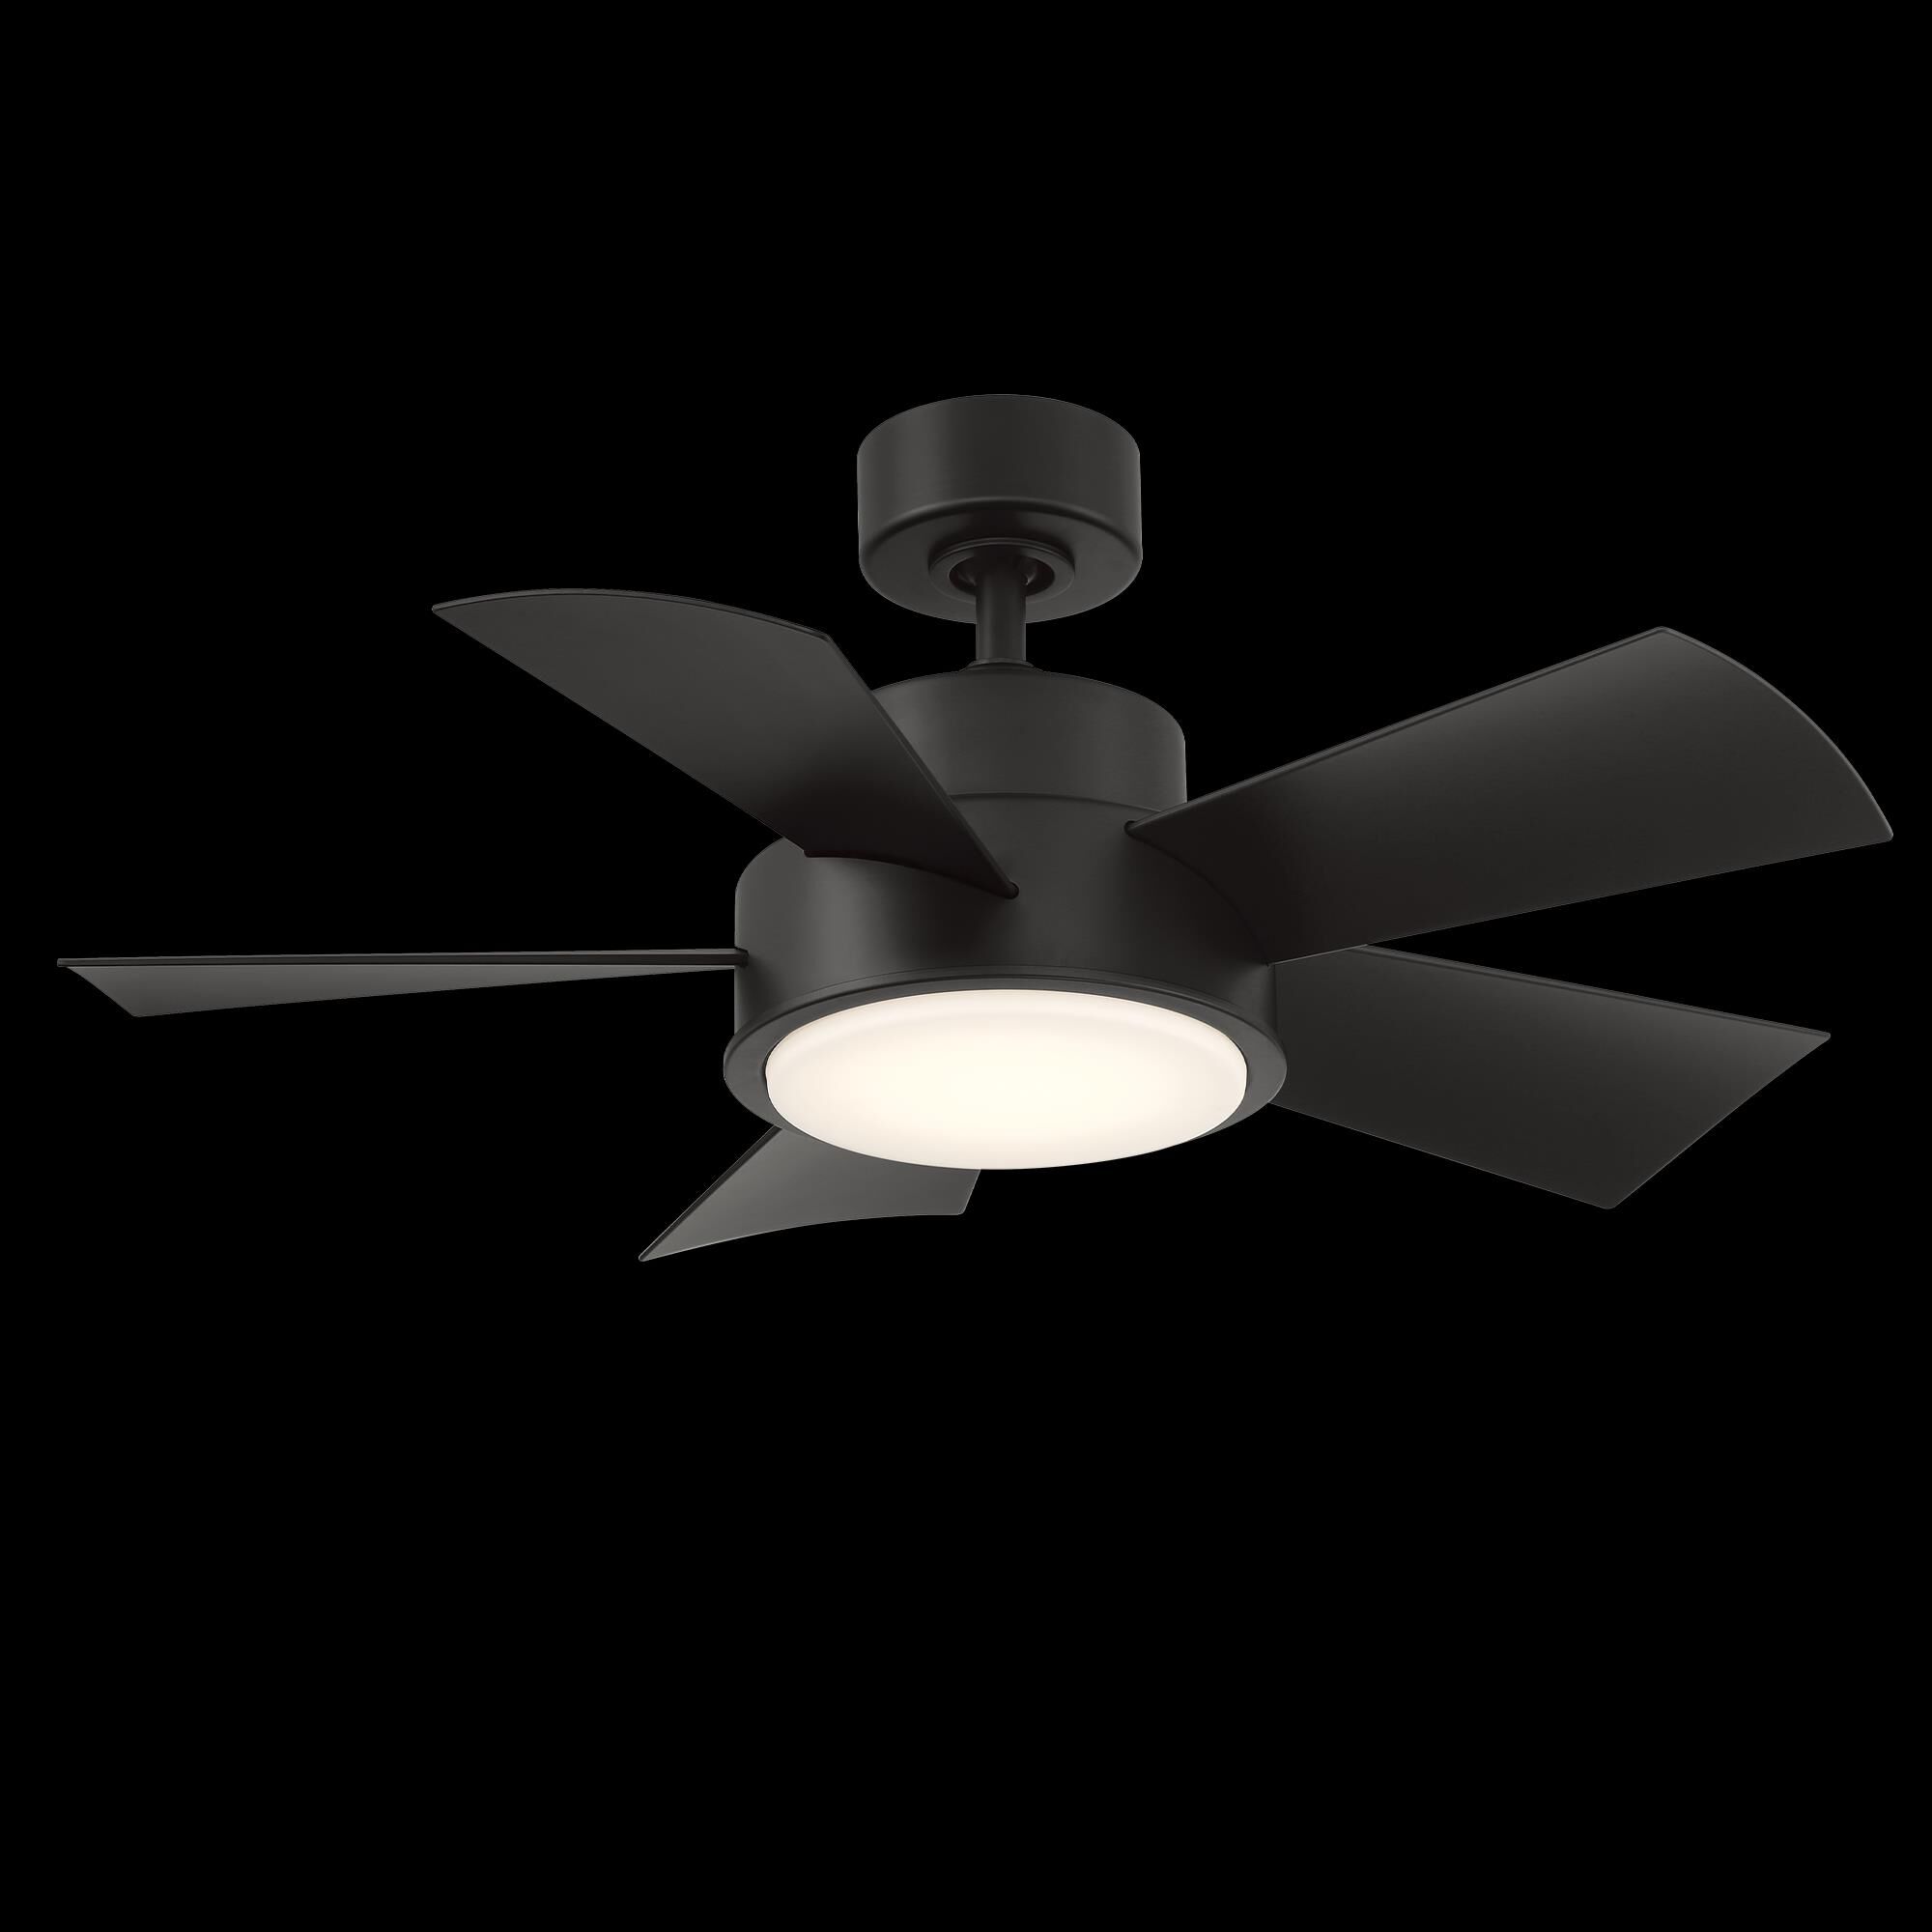 Photos - Fan Modern Forms Vox Ceiling  Vox - FR-W1802-38L-MB - Modern Contemporary F